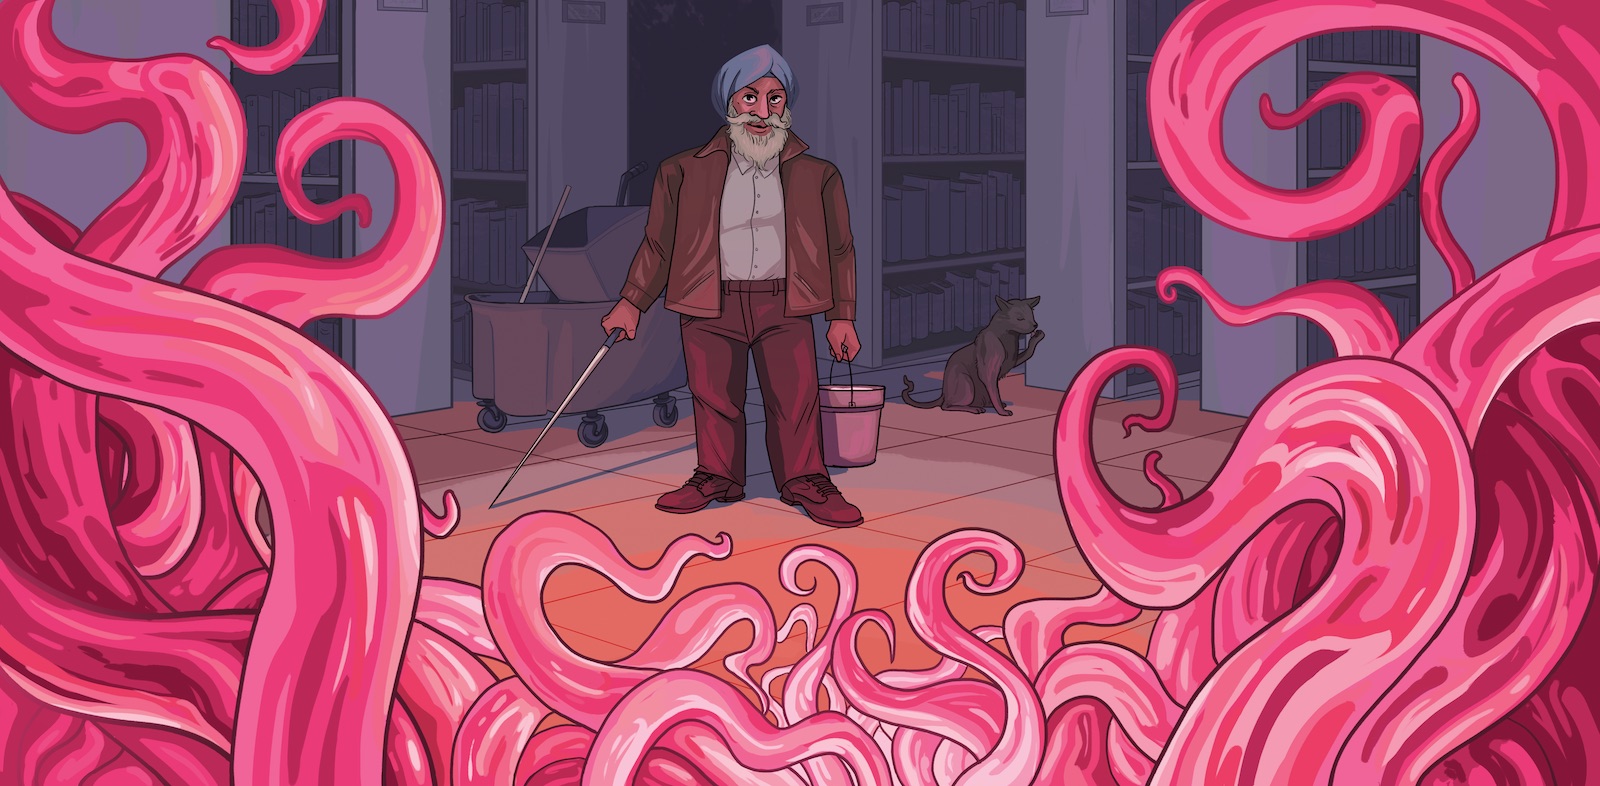 A man in a turban, holding a sword, stares down a many-tentacled beast. In the background, a cat nonchalantly licks its paw.